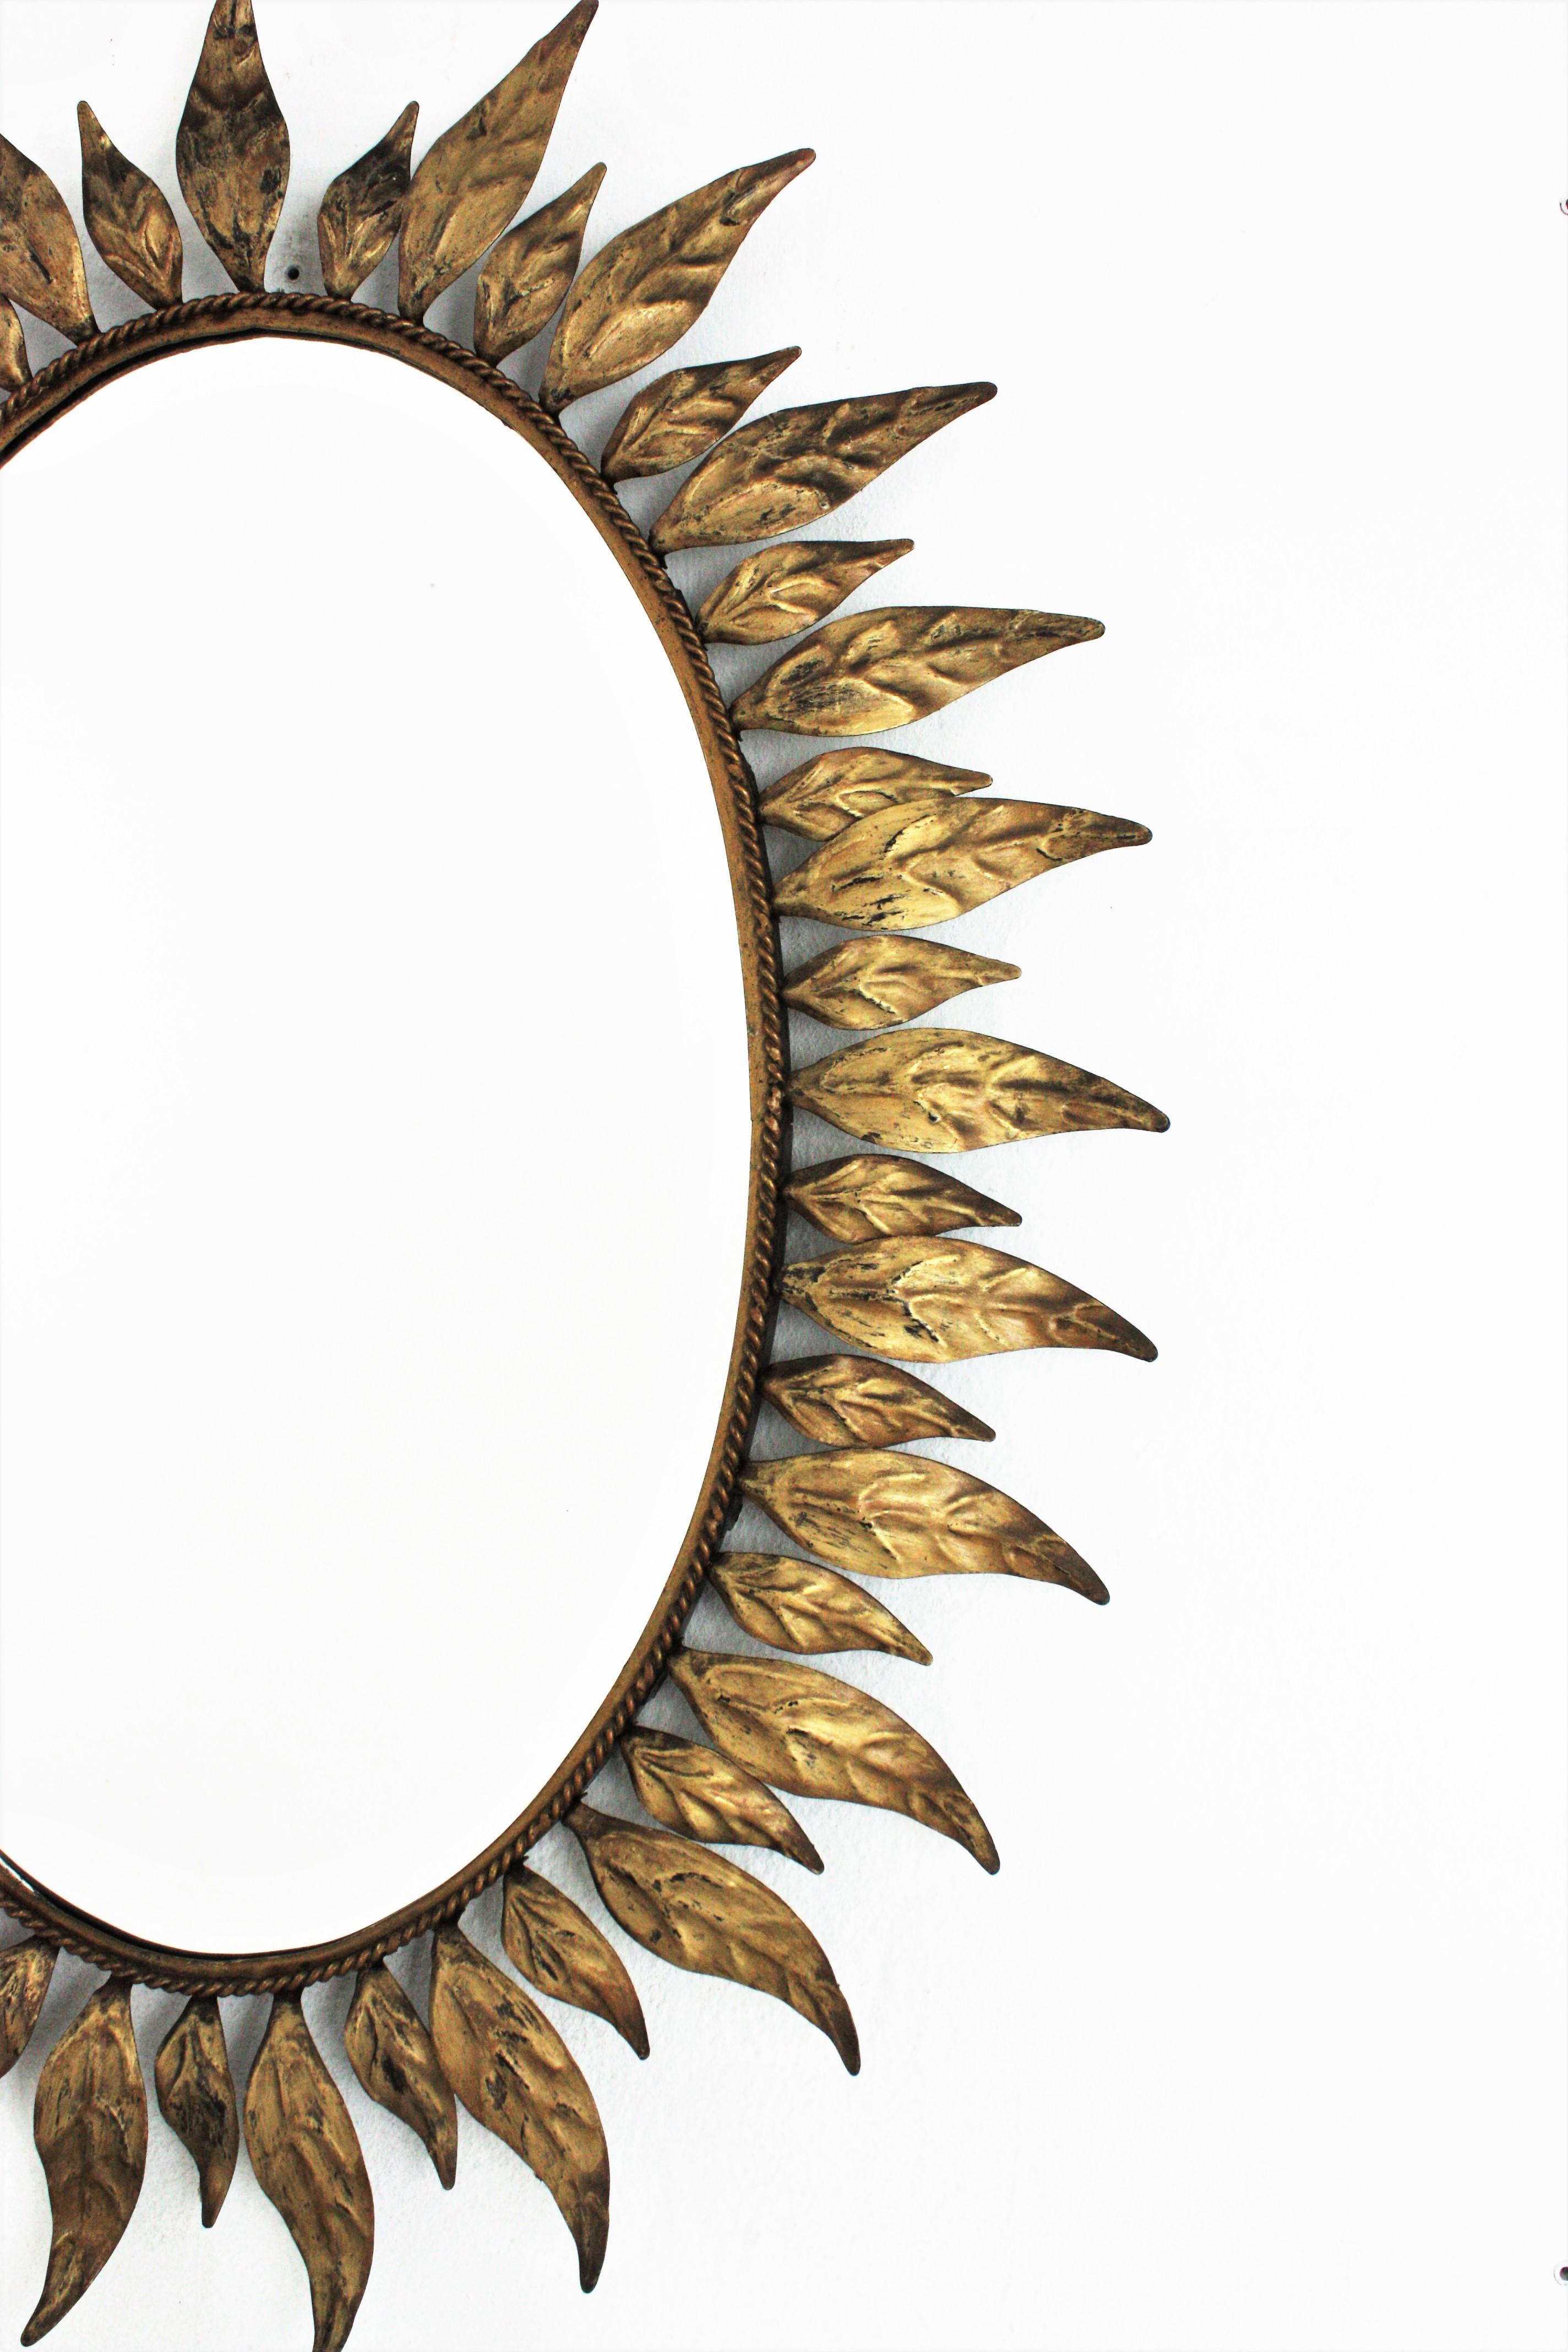 Spanish Sunburst Oval Mirror in Gilt Metal with Leafed Frame For Sale 2